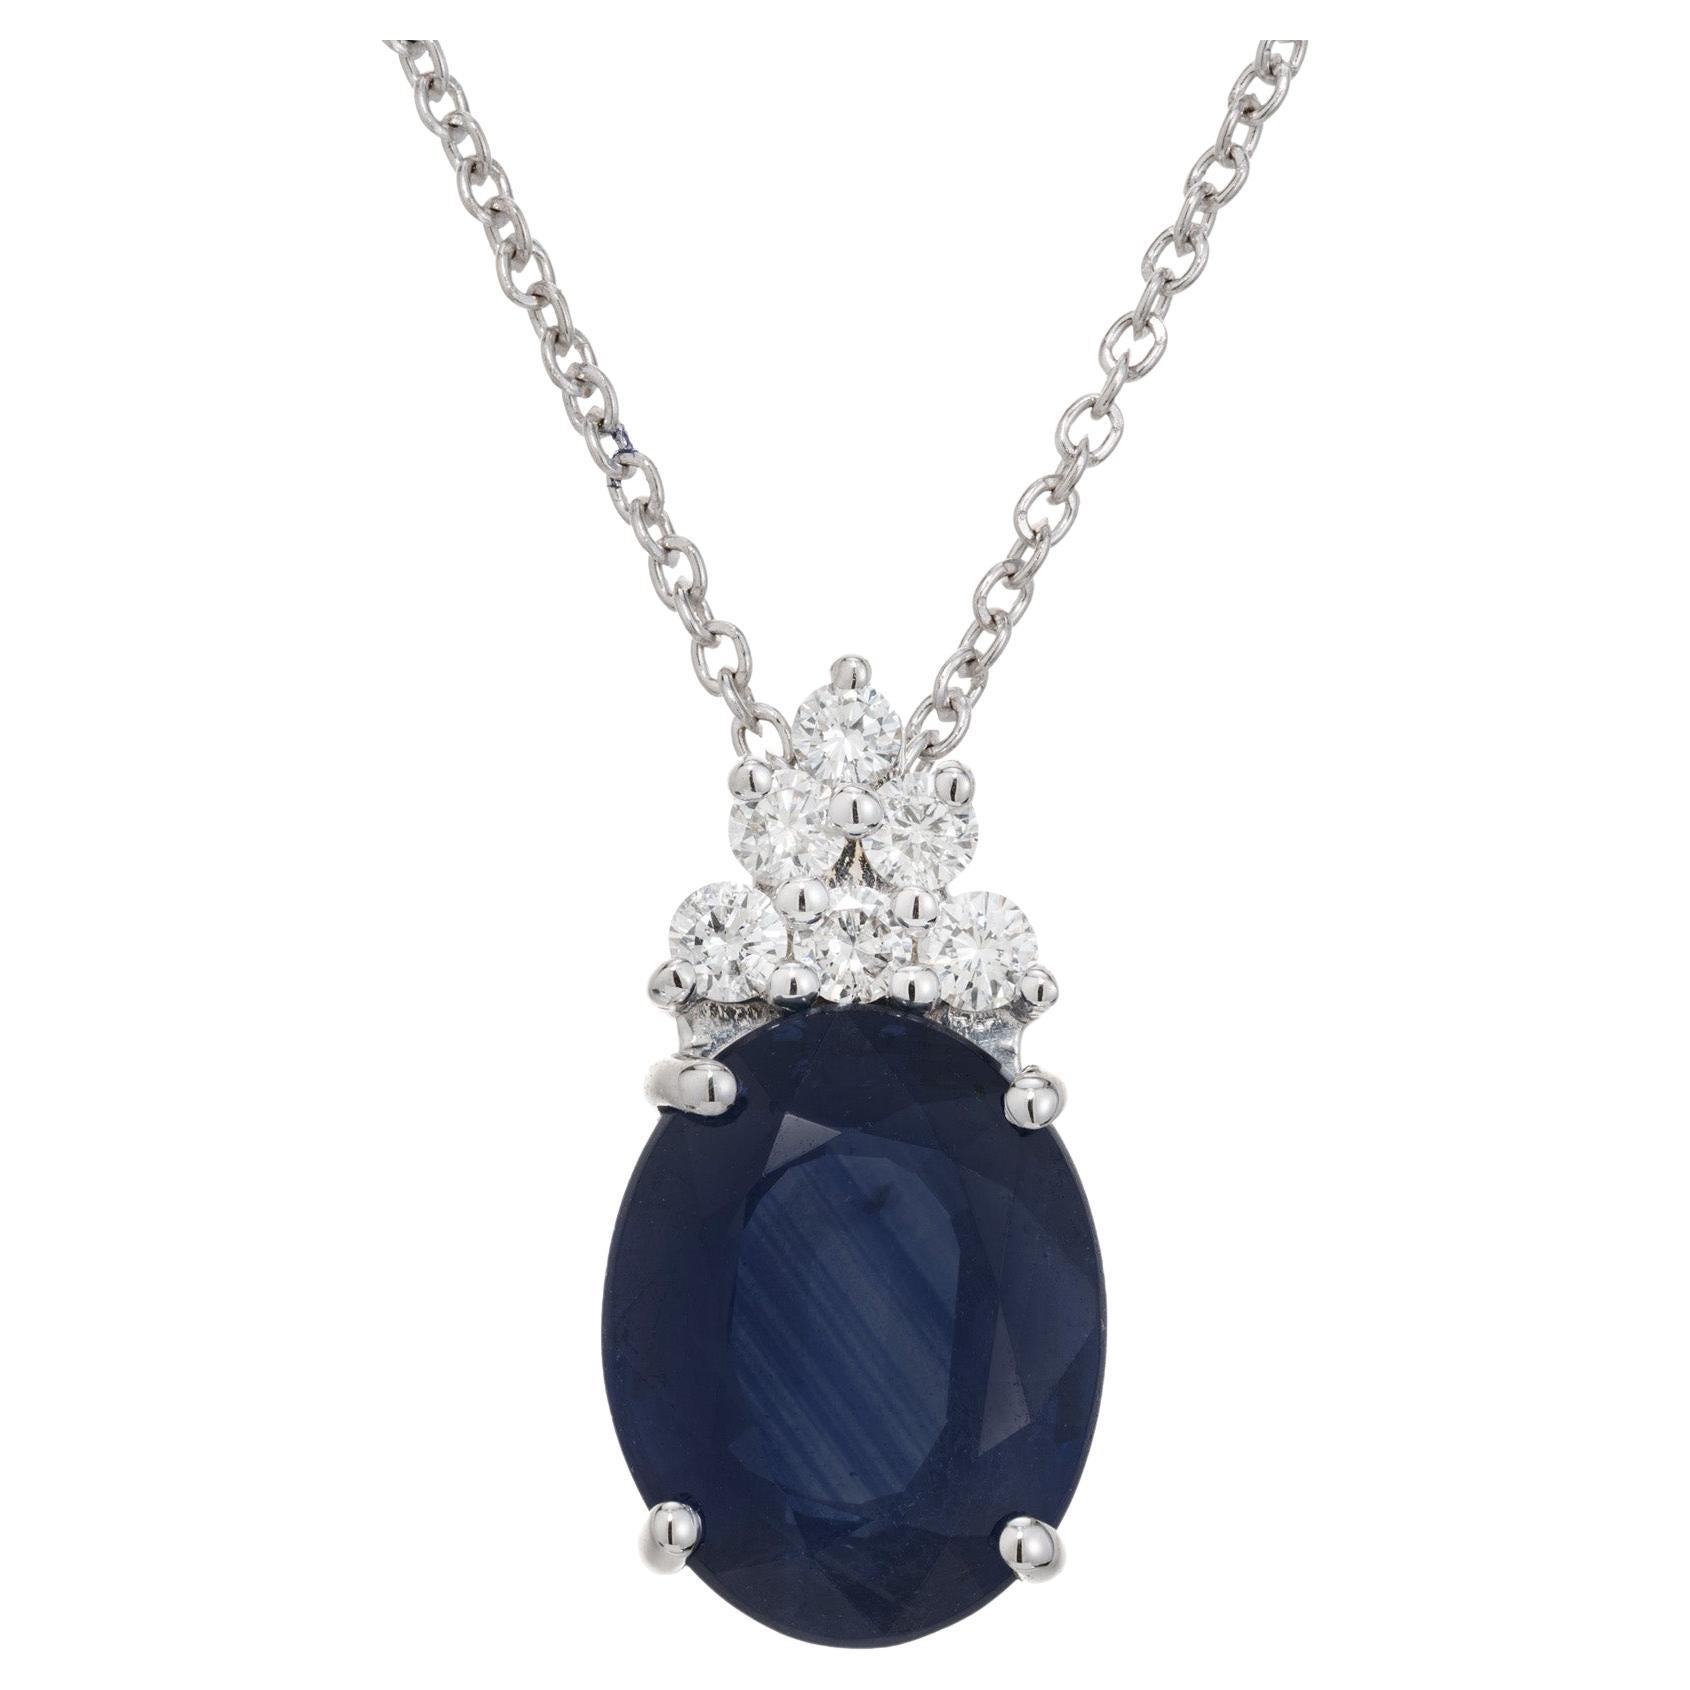 Peter Suchy GIA Certified 2.67 Carat Oval Sapphire Diamond Pendant Necklace 